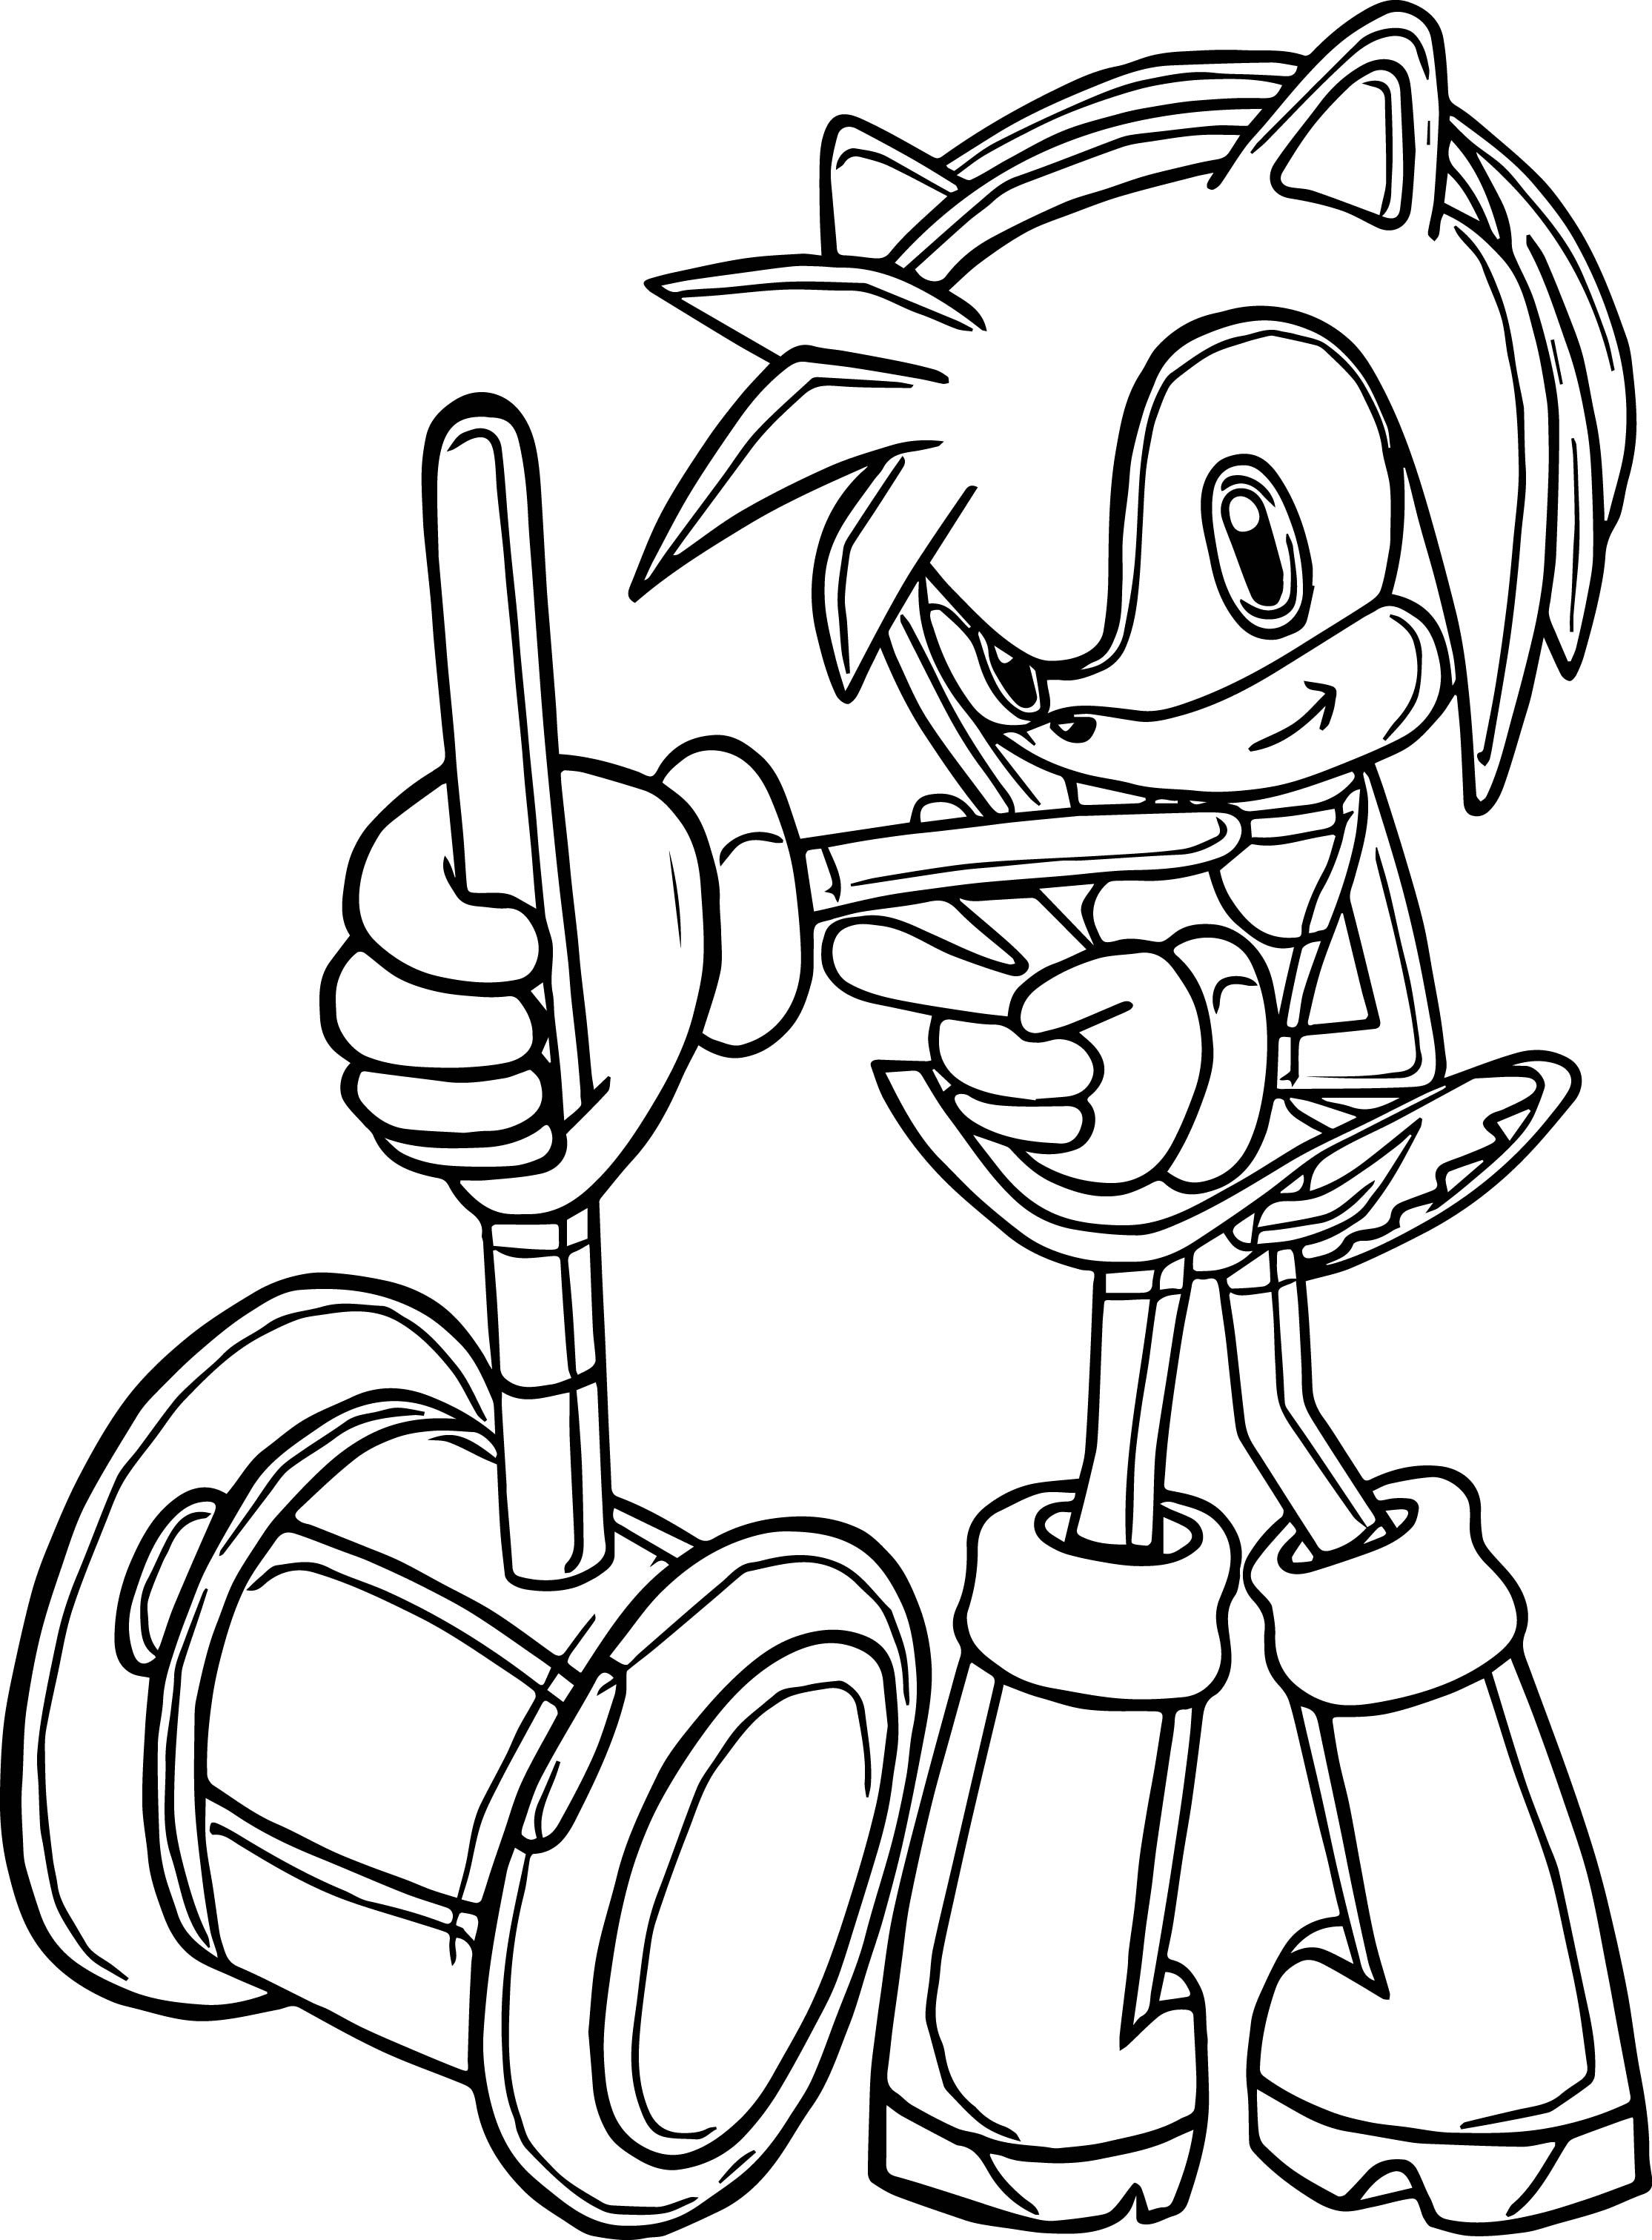 Nice Amy Rose My Hammer Coloring Page Amy Rose Coloring Pages Color